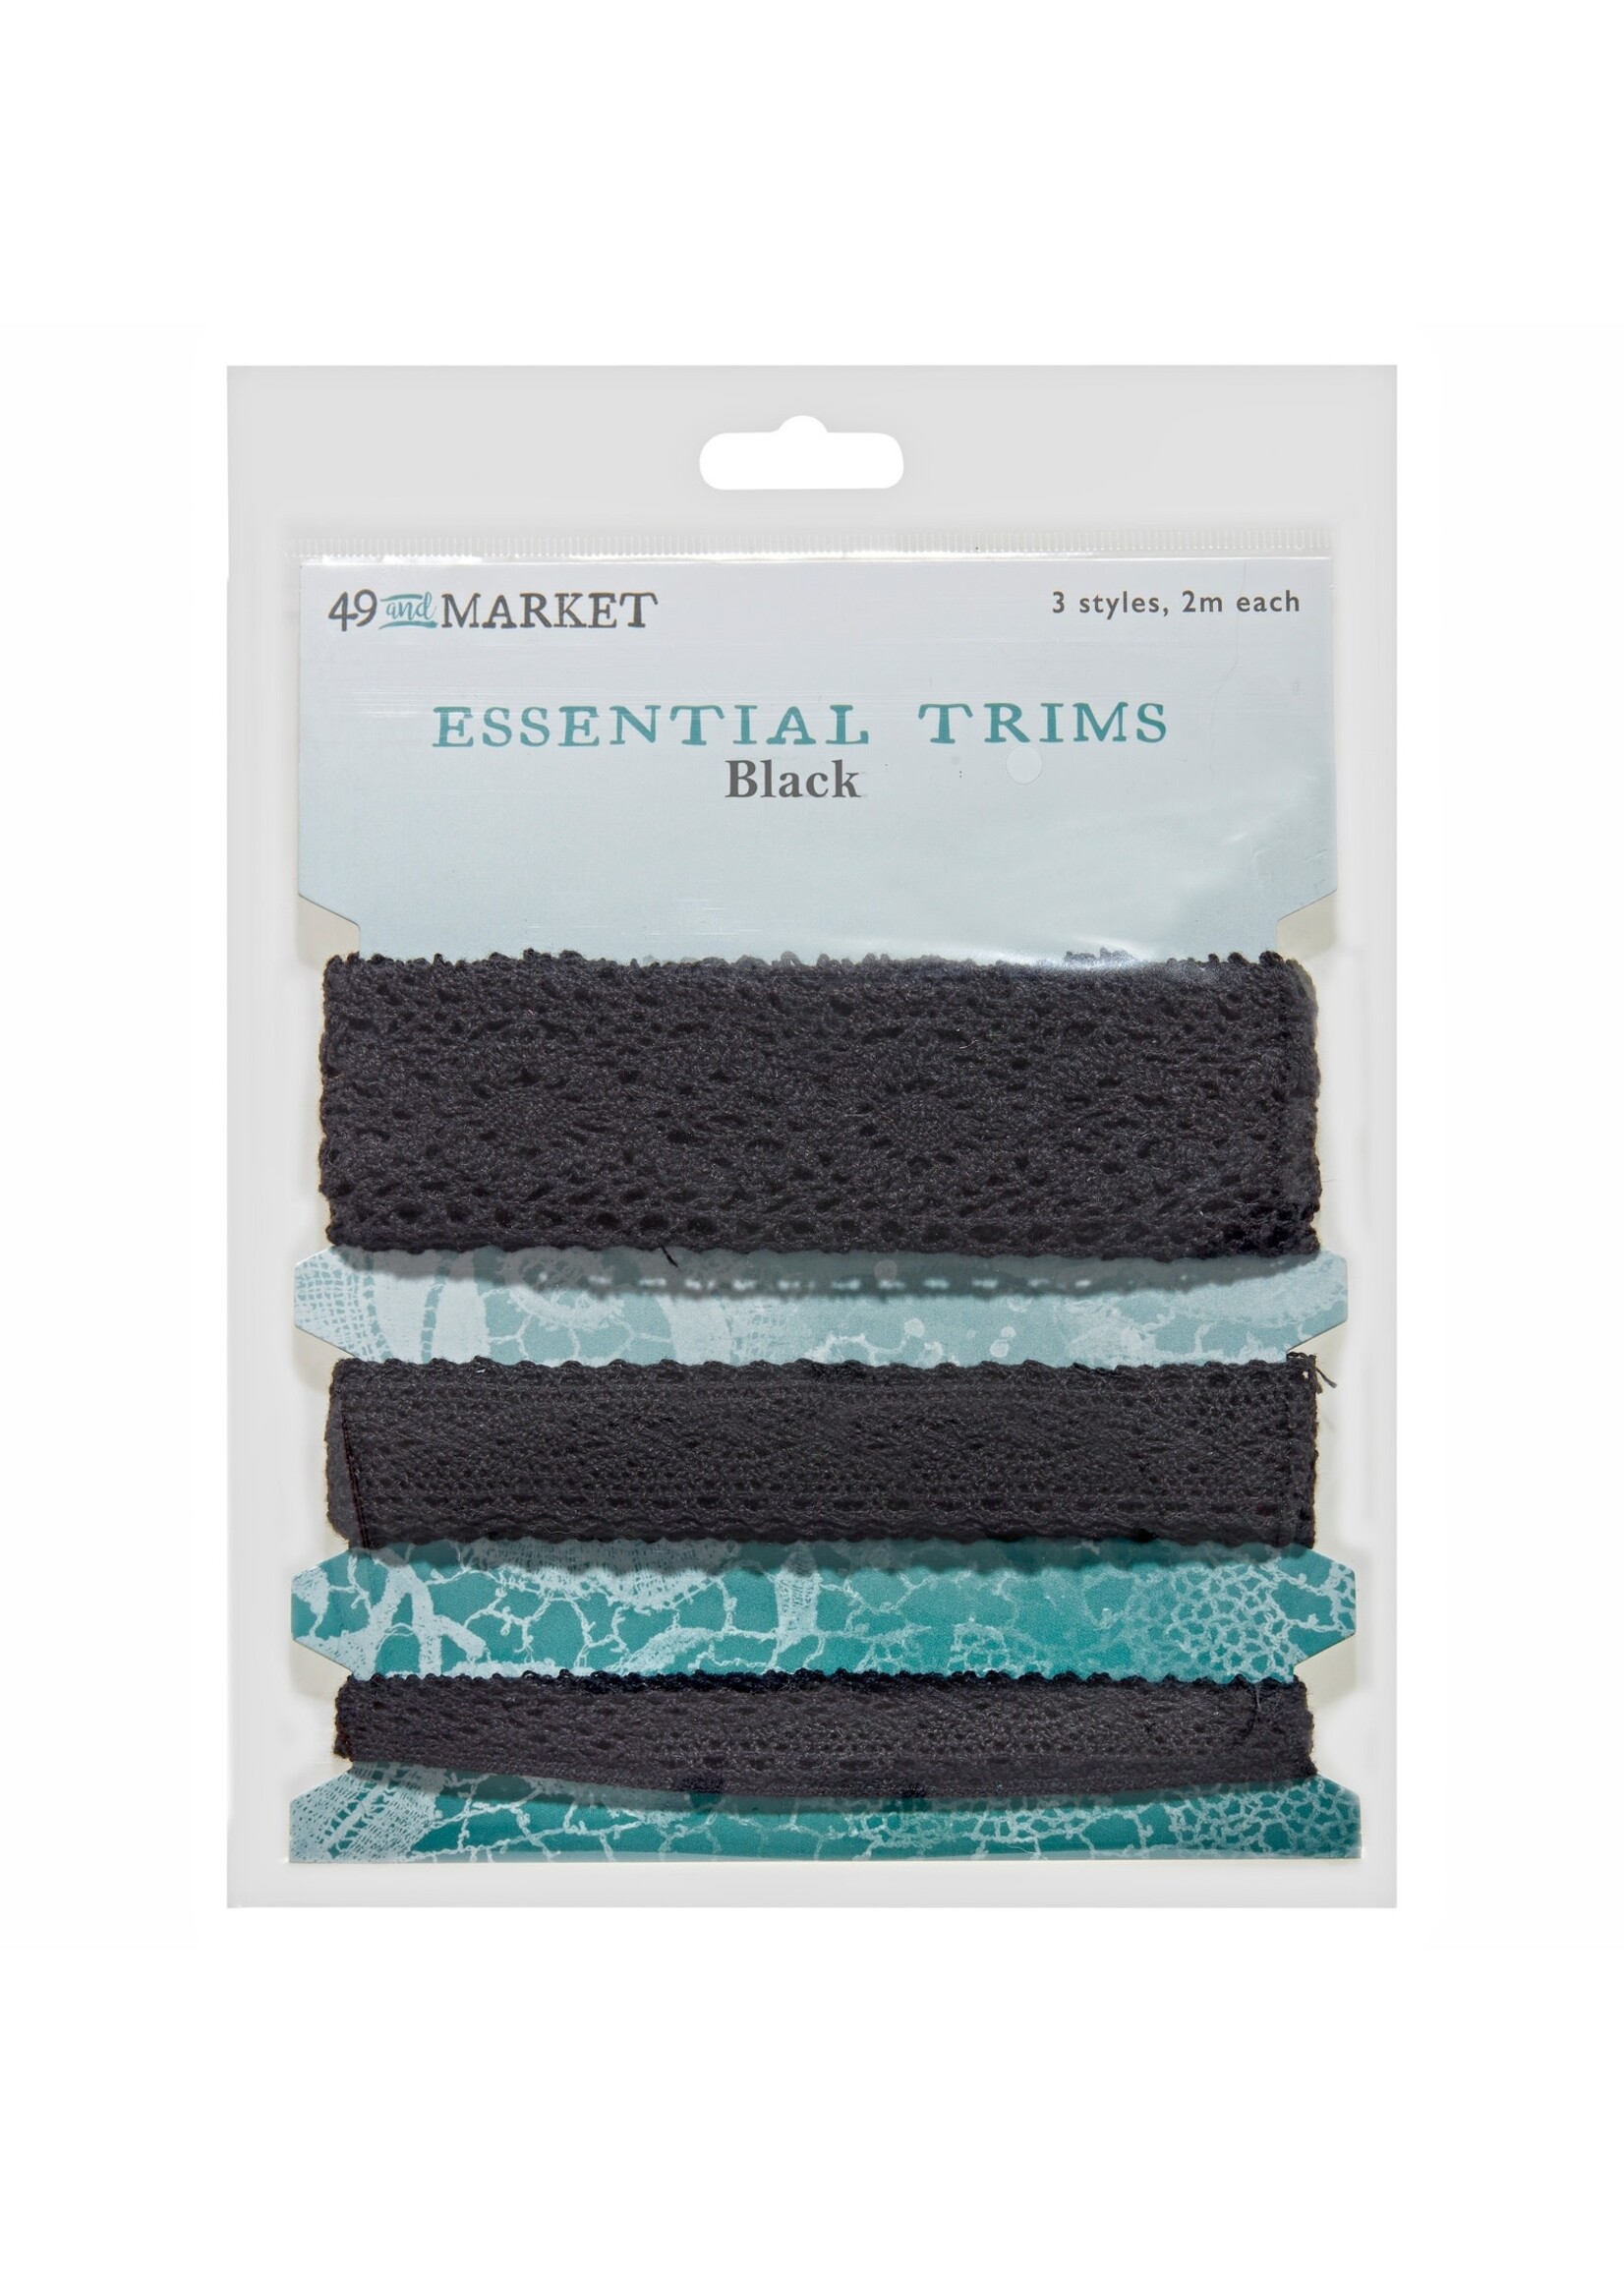 49 and Market 49 And Market Essential Trims: Black